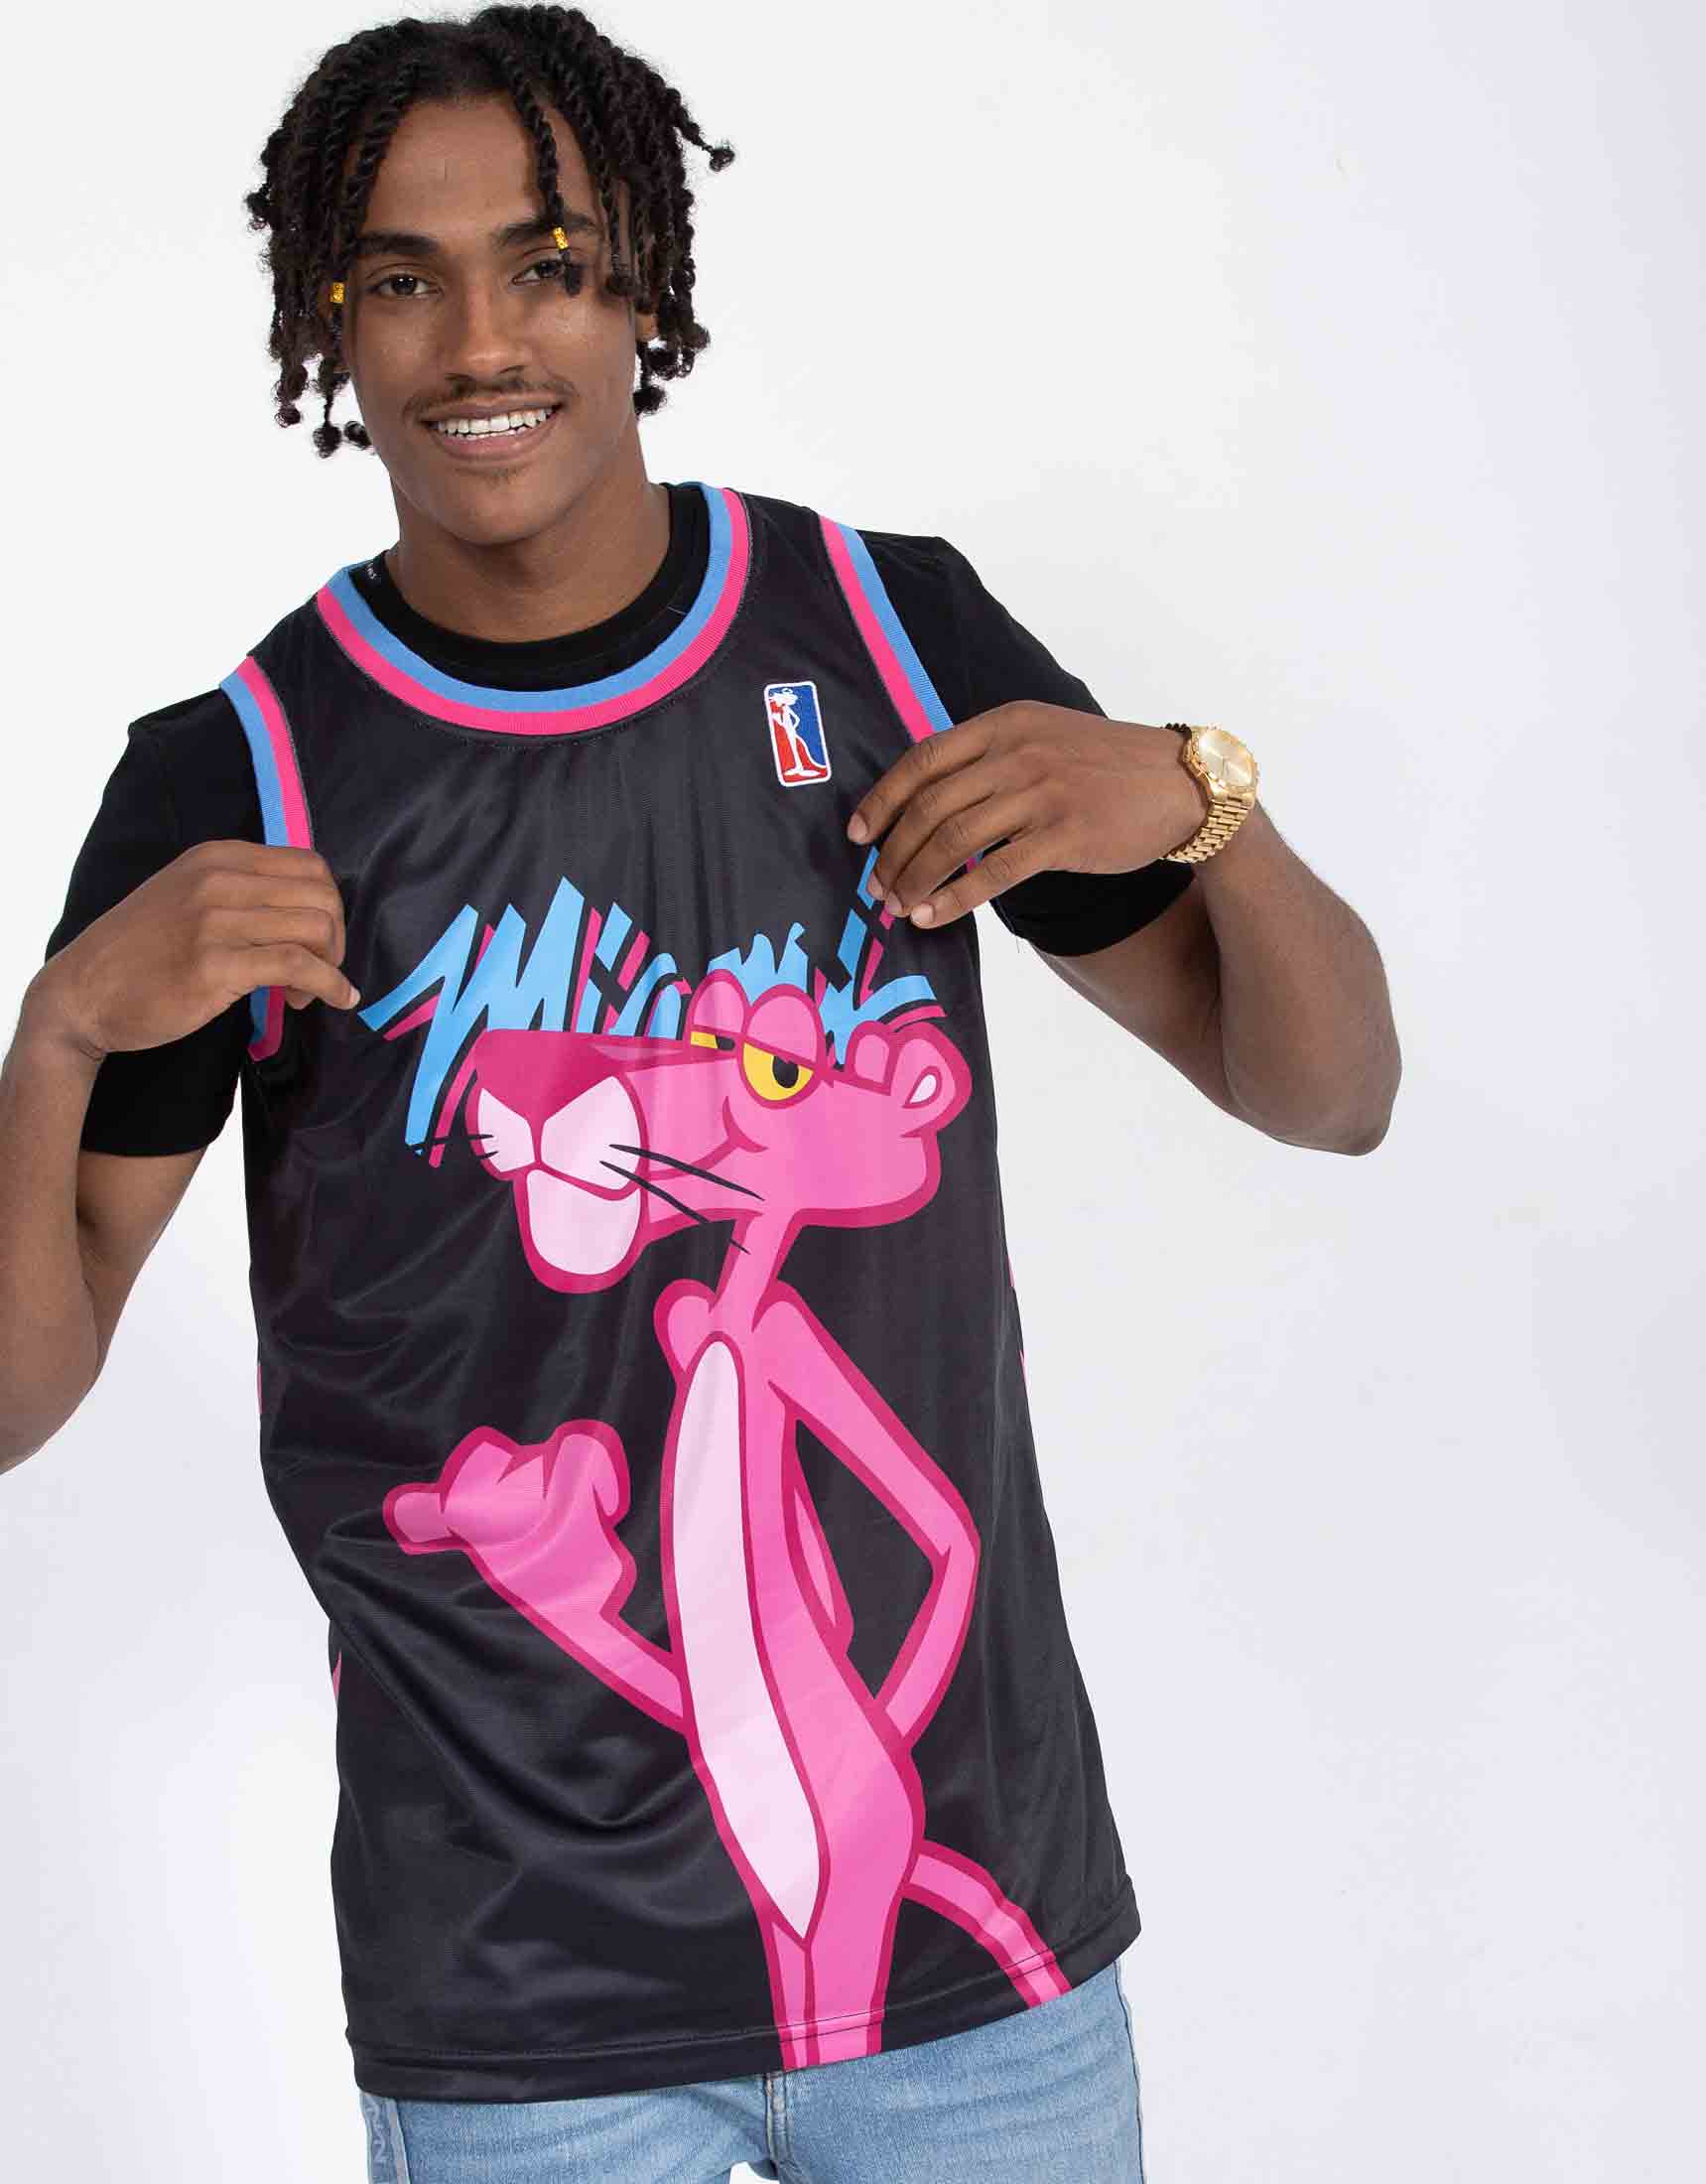 Miami X Pink Panther #3 Basketball Jersey – 99Jersey®: Your Ultimate  Destination for Unique Jerseys, Shorts, and More